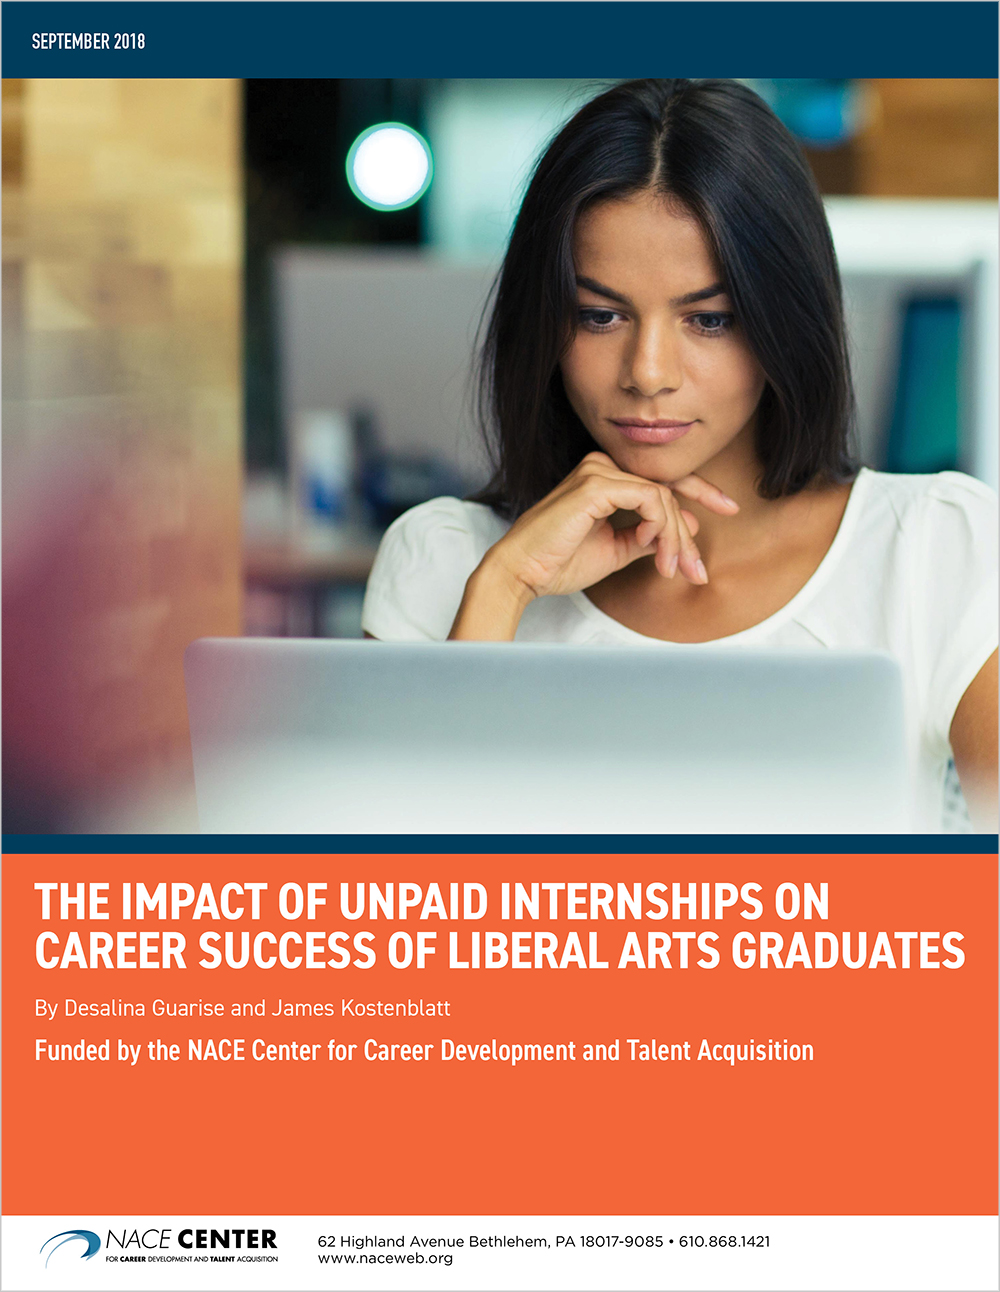 Unpaid Internships and Early Career Outcomes